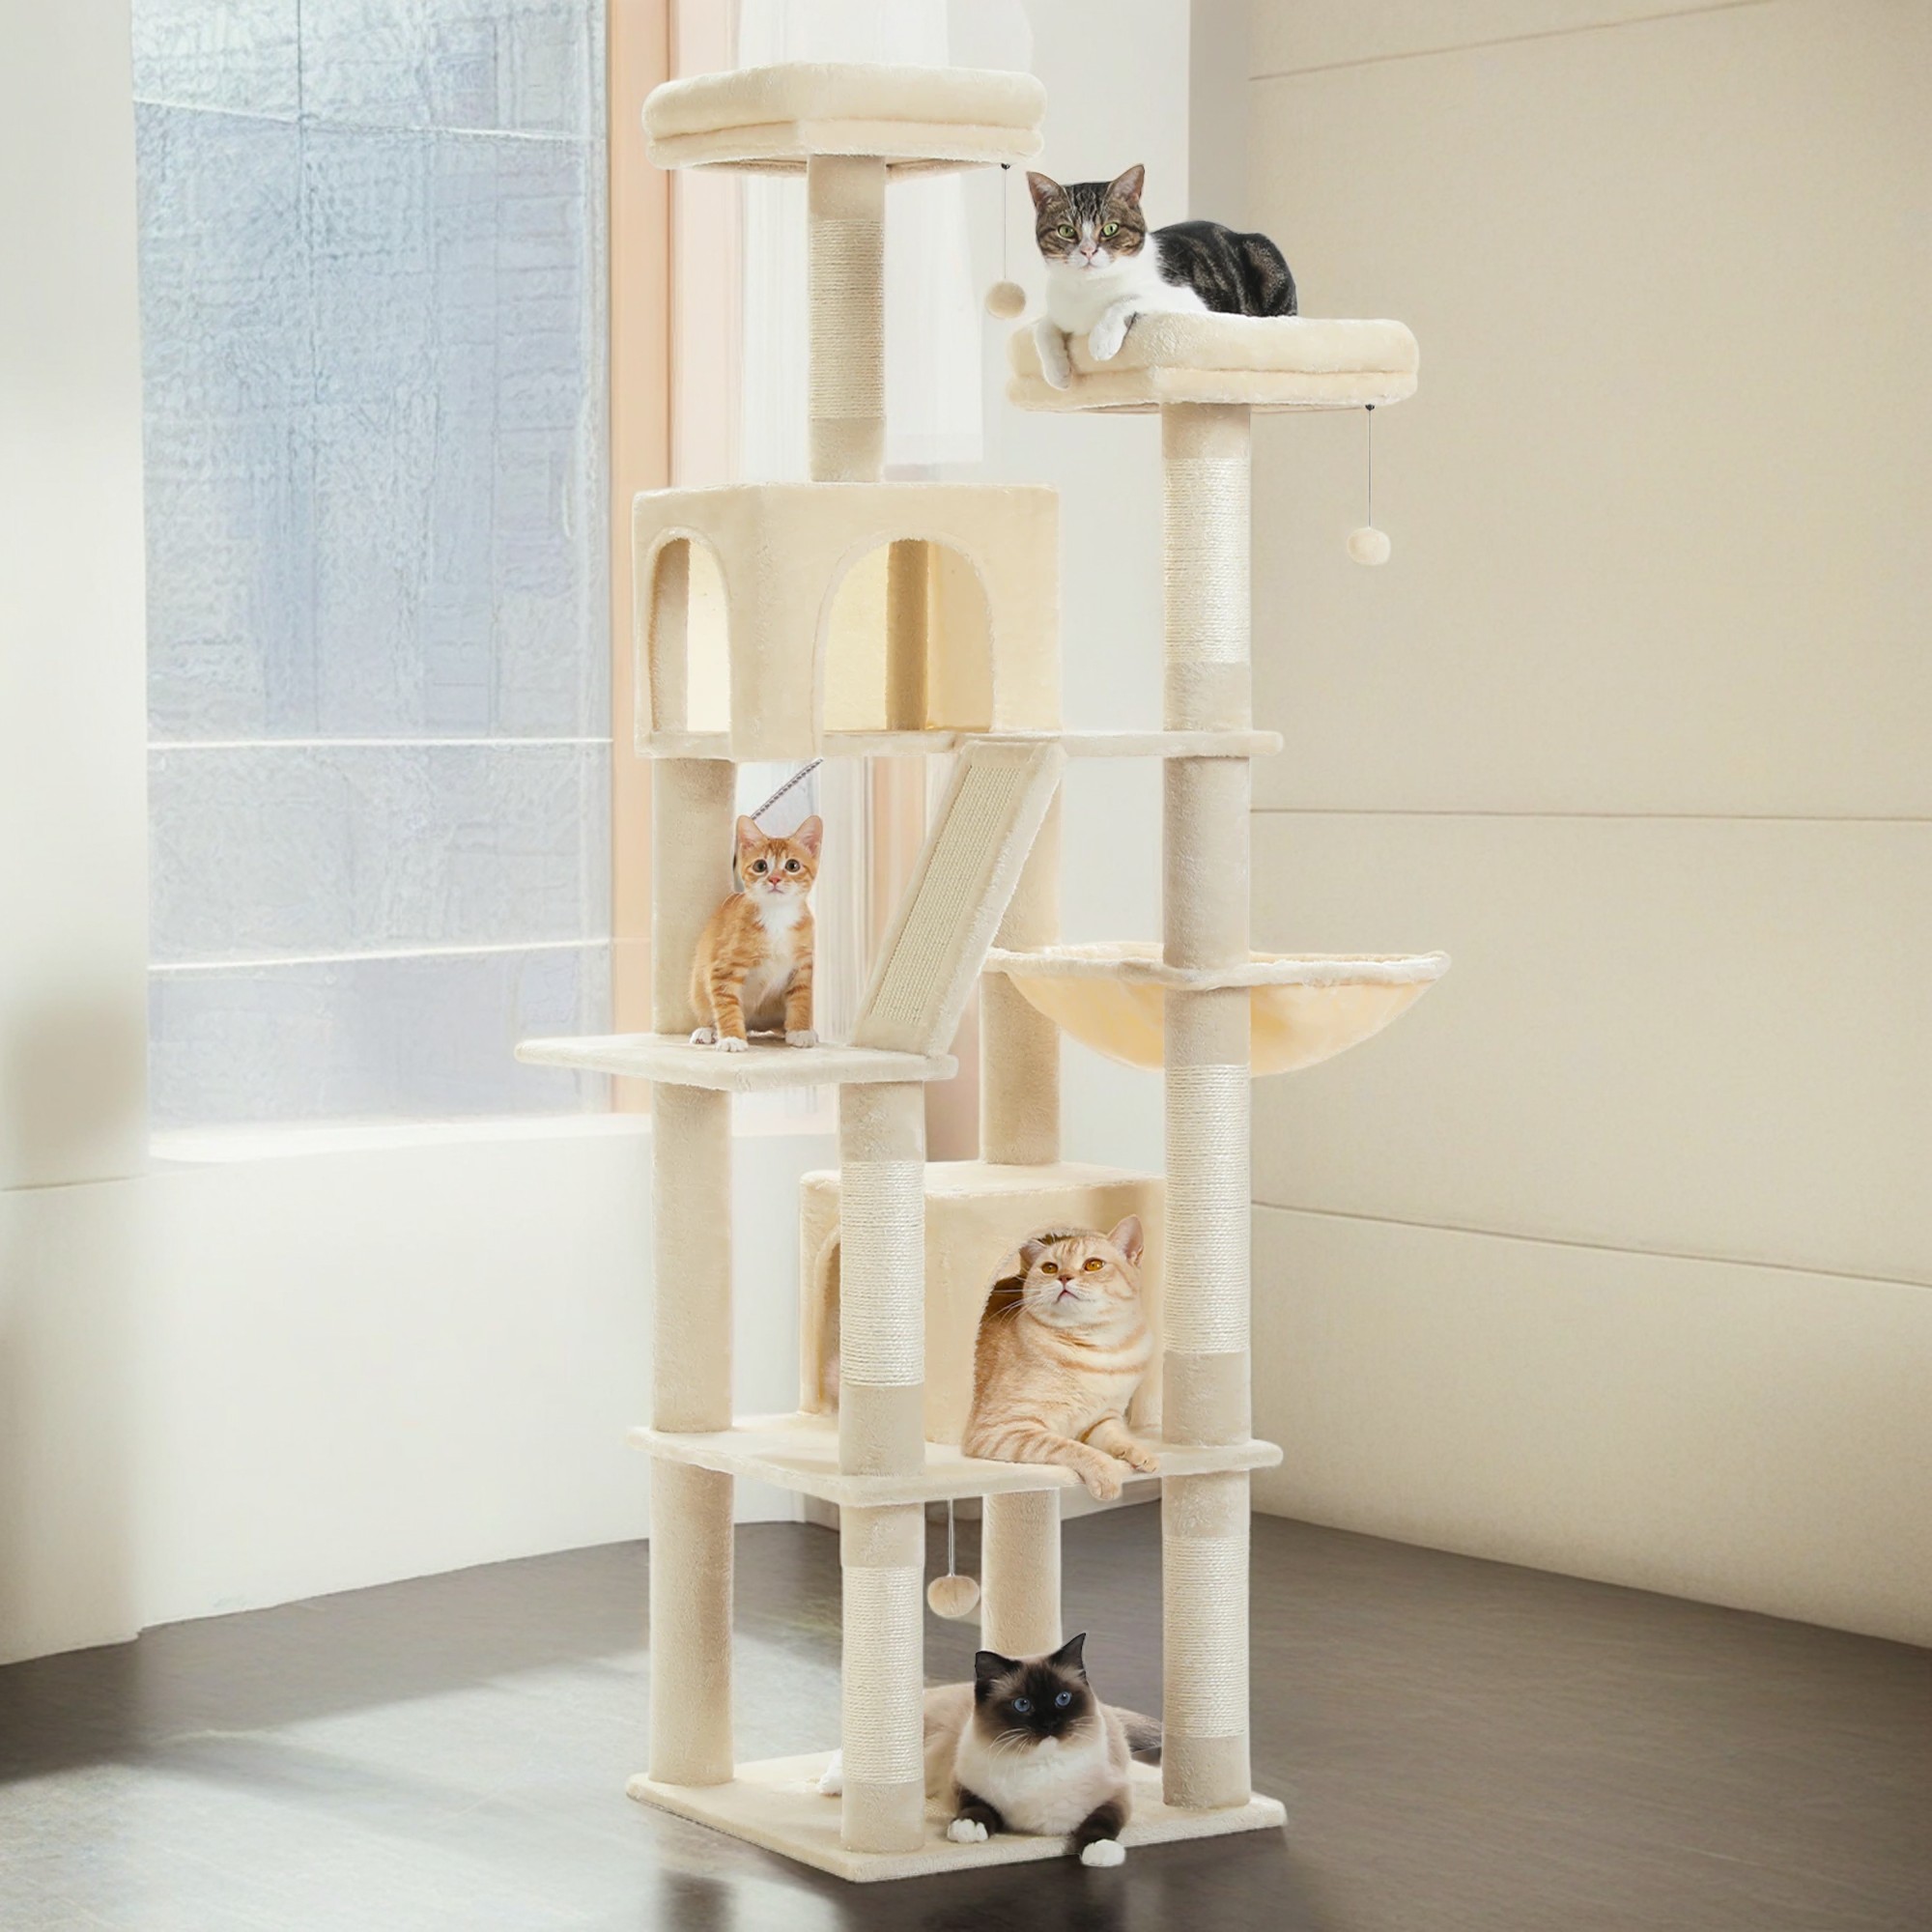 Pefilos 70" Large Cat Tree for Indoor Cats, Multi-Level Cat Tower Cat Scratching Post with 2 Perches, 2 Condos, Hammock and 2 Pompoms, Beige